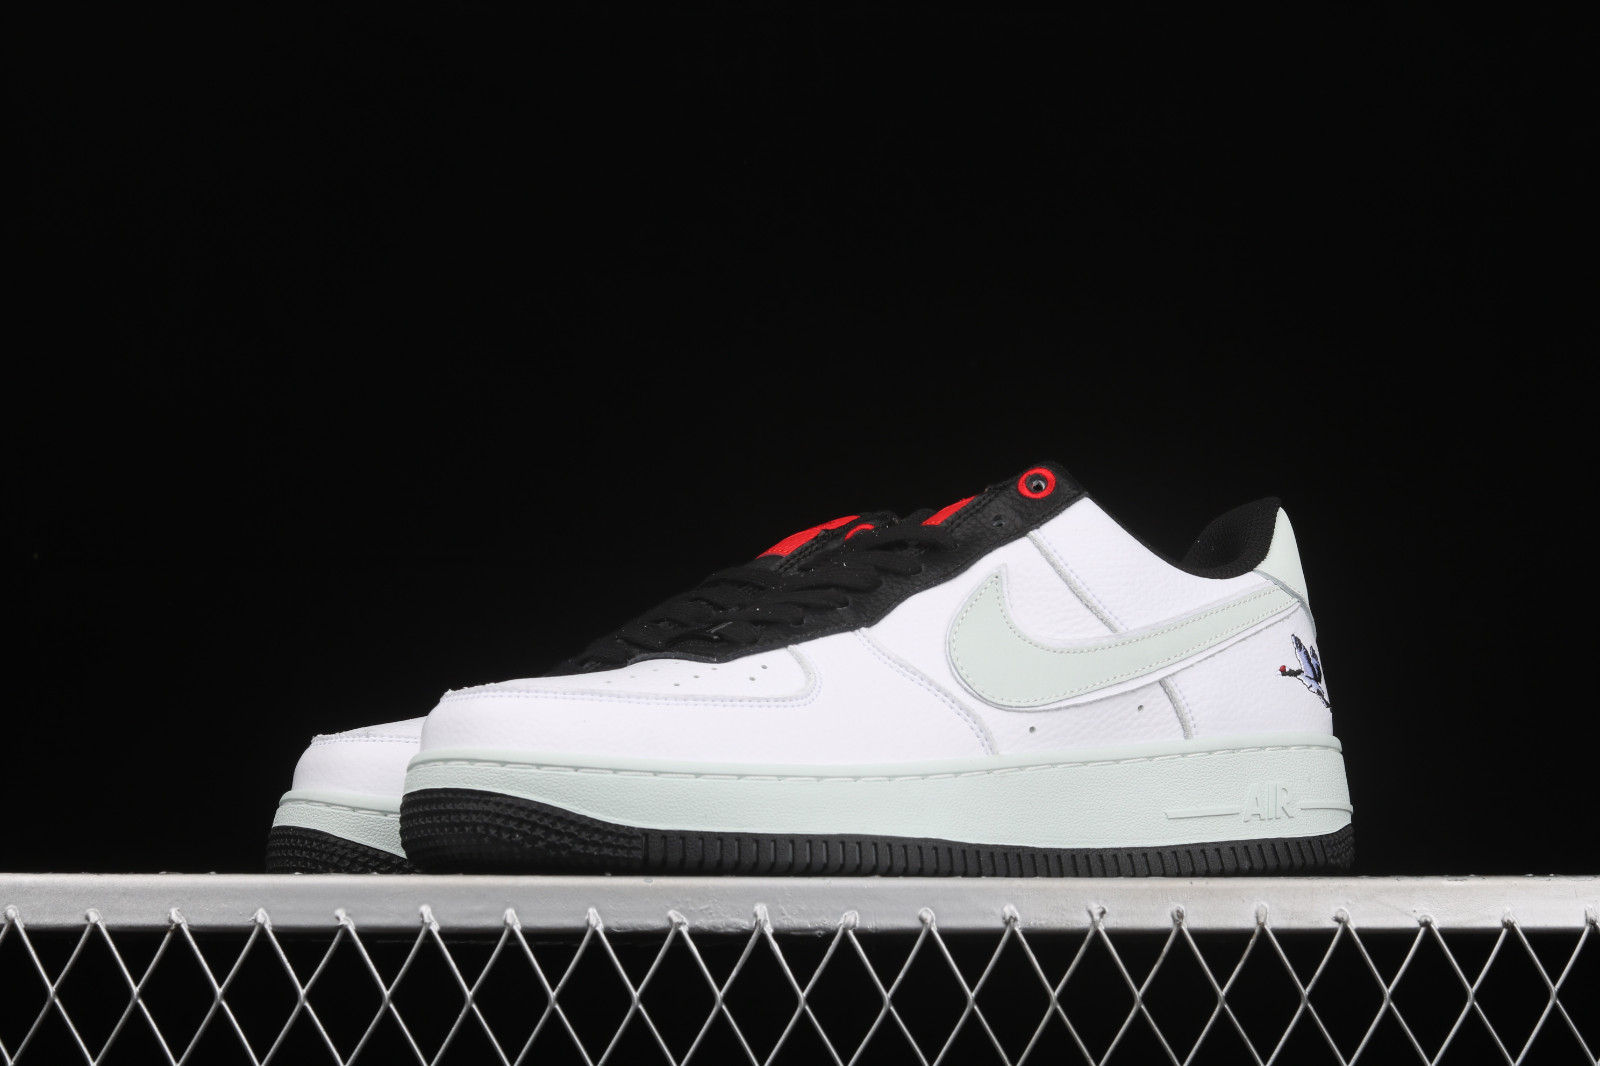 New Nike Air Force 1 ‘07 LV8 EMB “Icy Soles” Mens Sz 9 White Red CT2295-110